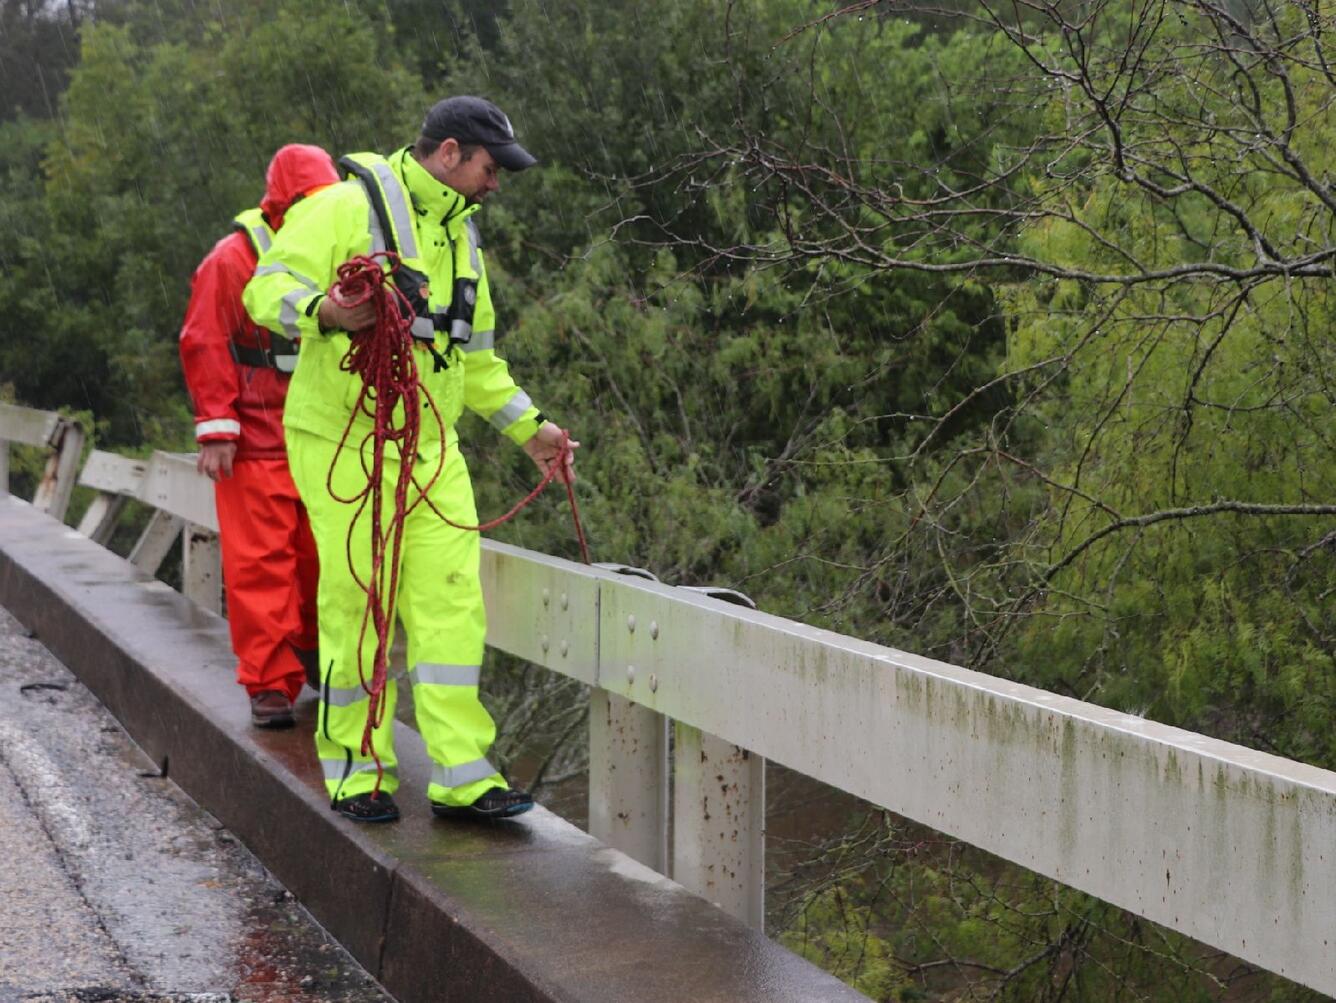 Image shows USGS scientists in PFDs measuring flooding along an elevated roadway